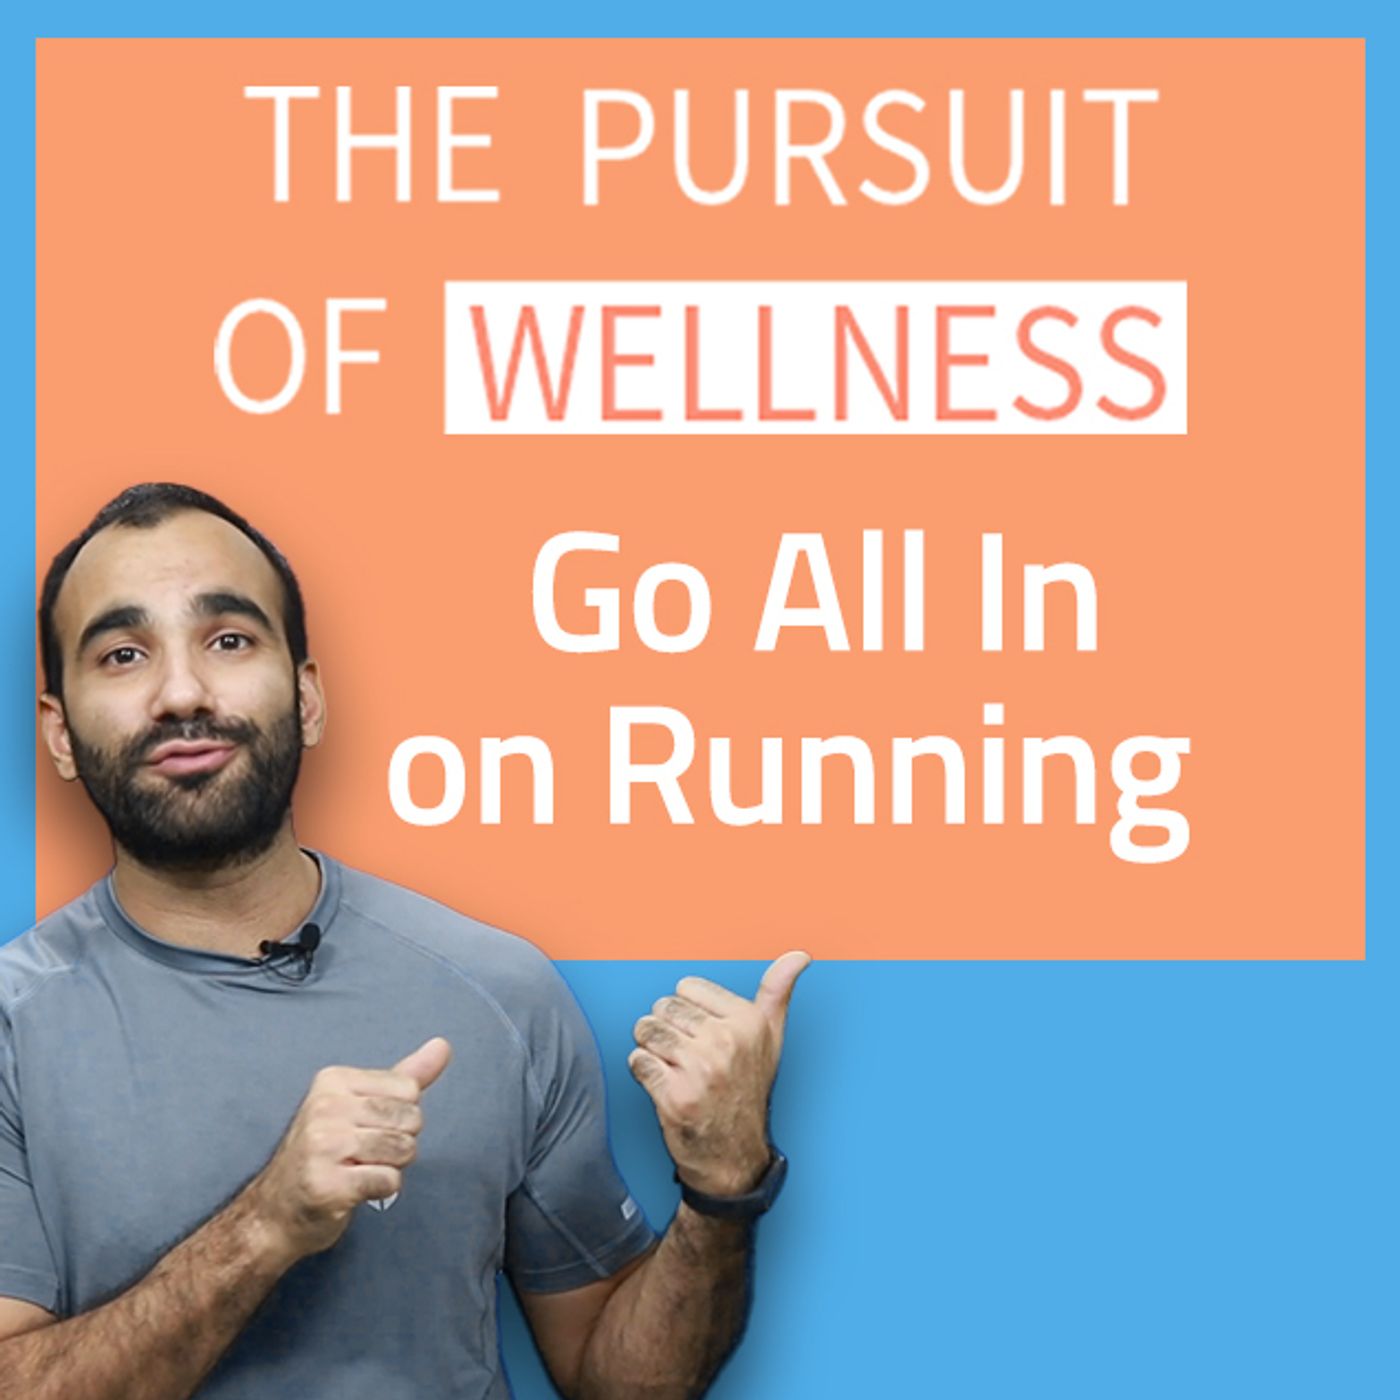 S2 Ep11: "Go All In on Running" with Nakul Butta